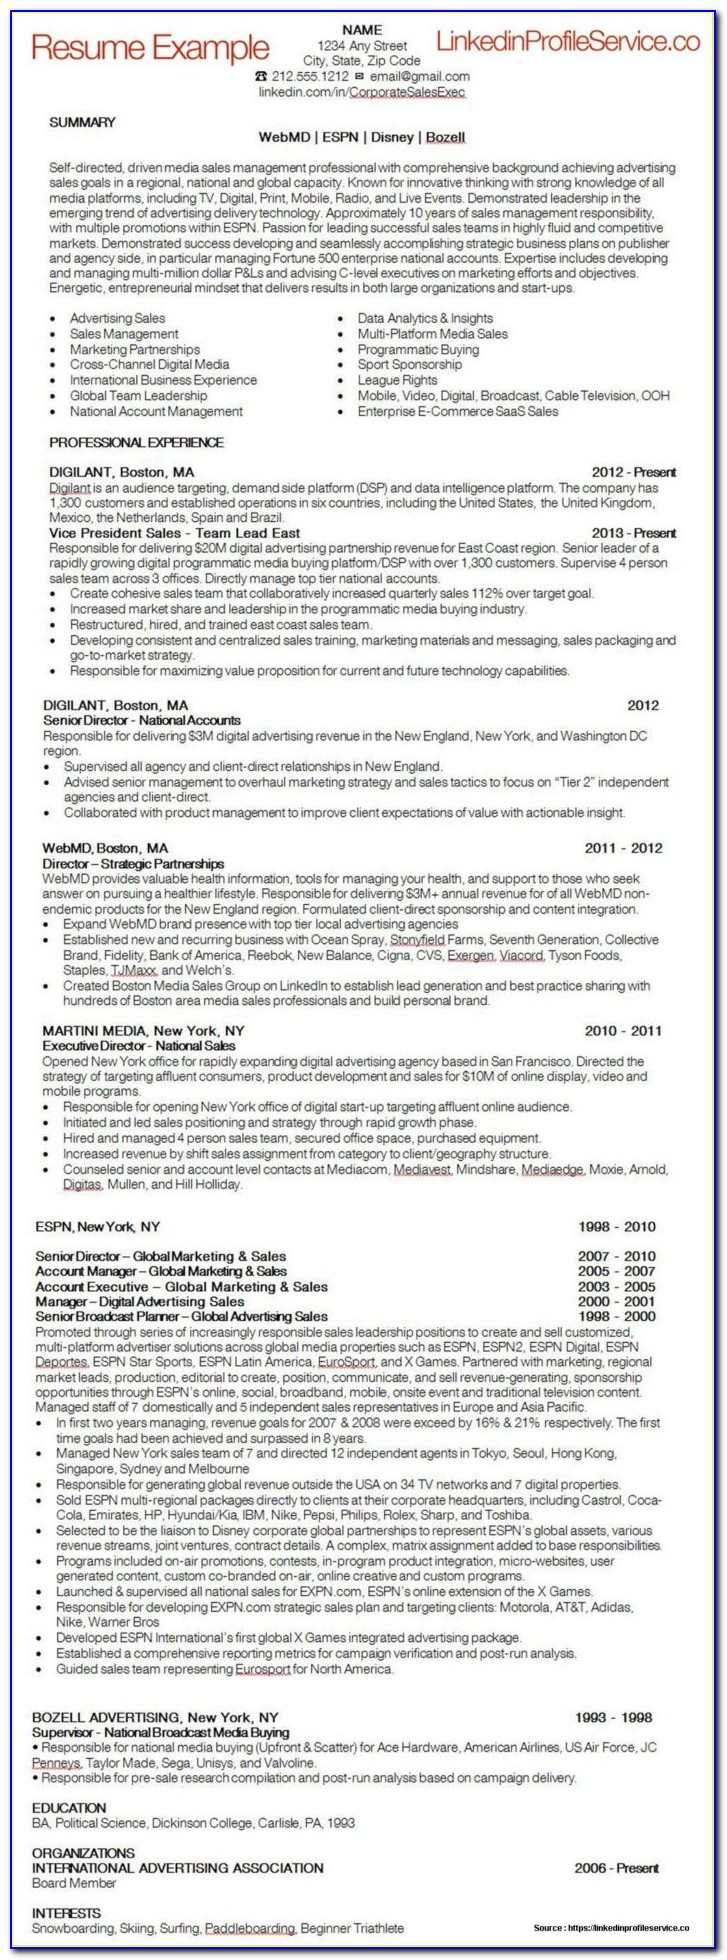 Example Of A Job Resume With No Experience